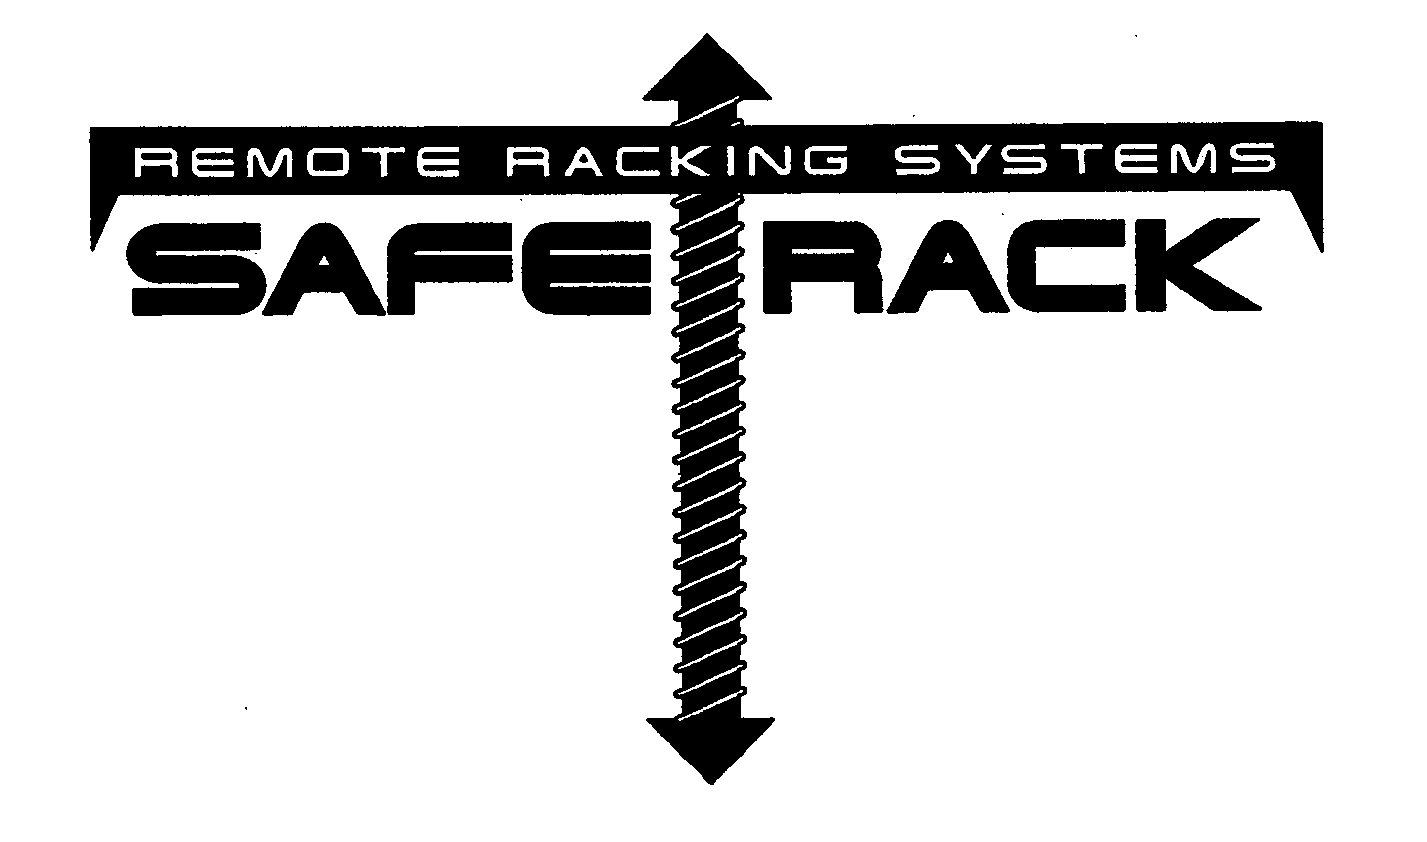  REMOTE RACKING SYSTEMS SAFE RACK